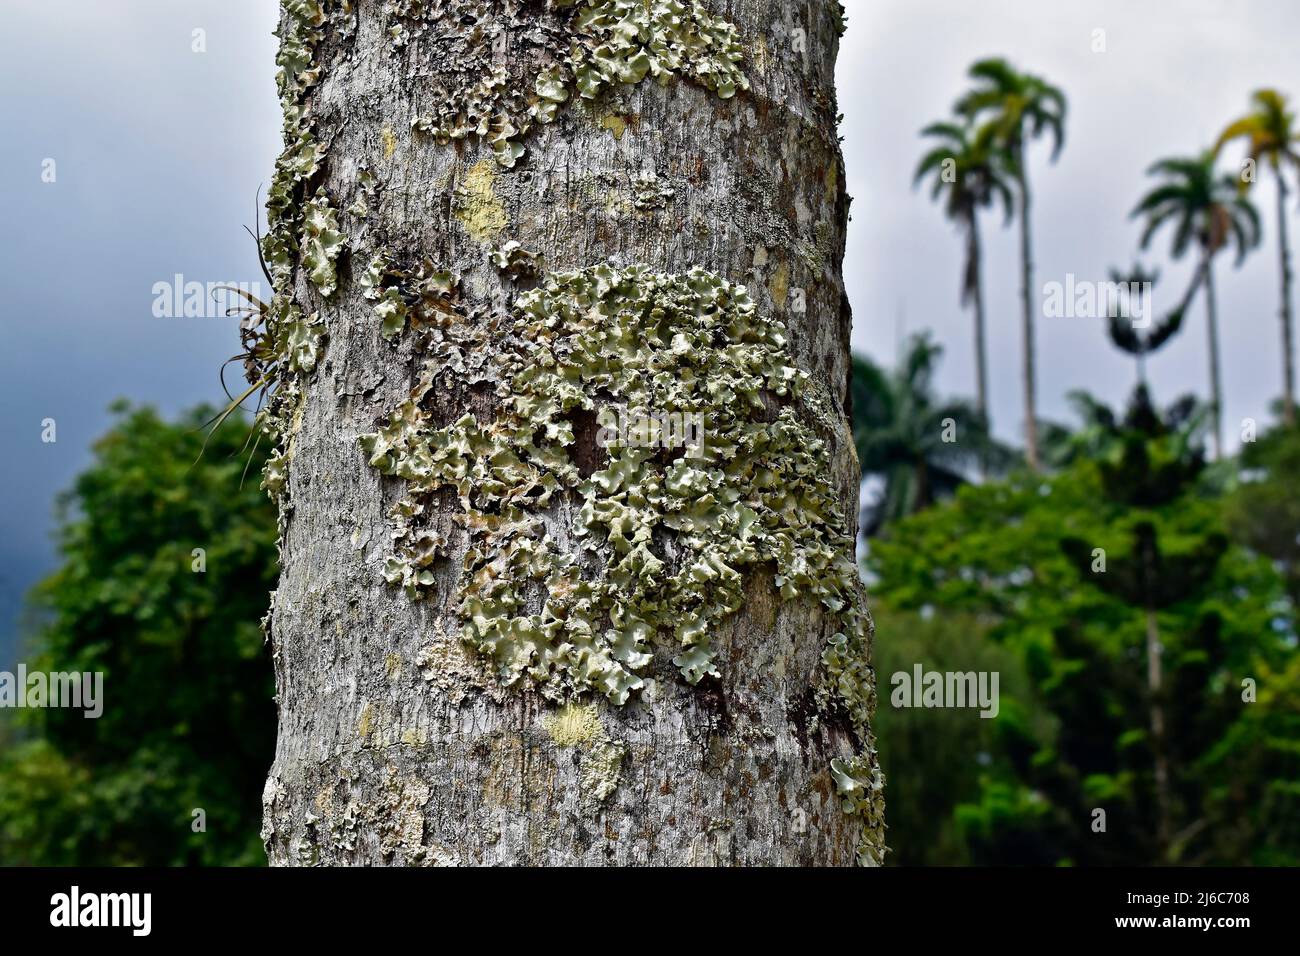 Lichen on palm tree trunk in the tropical rainforest Stock Photo